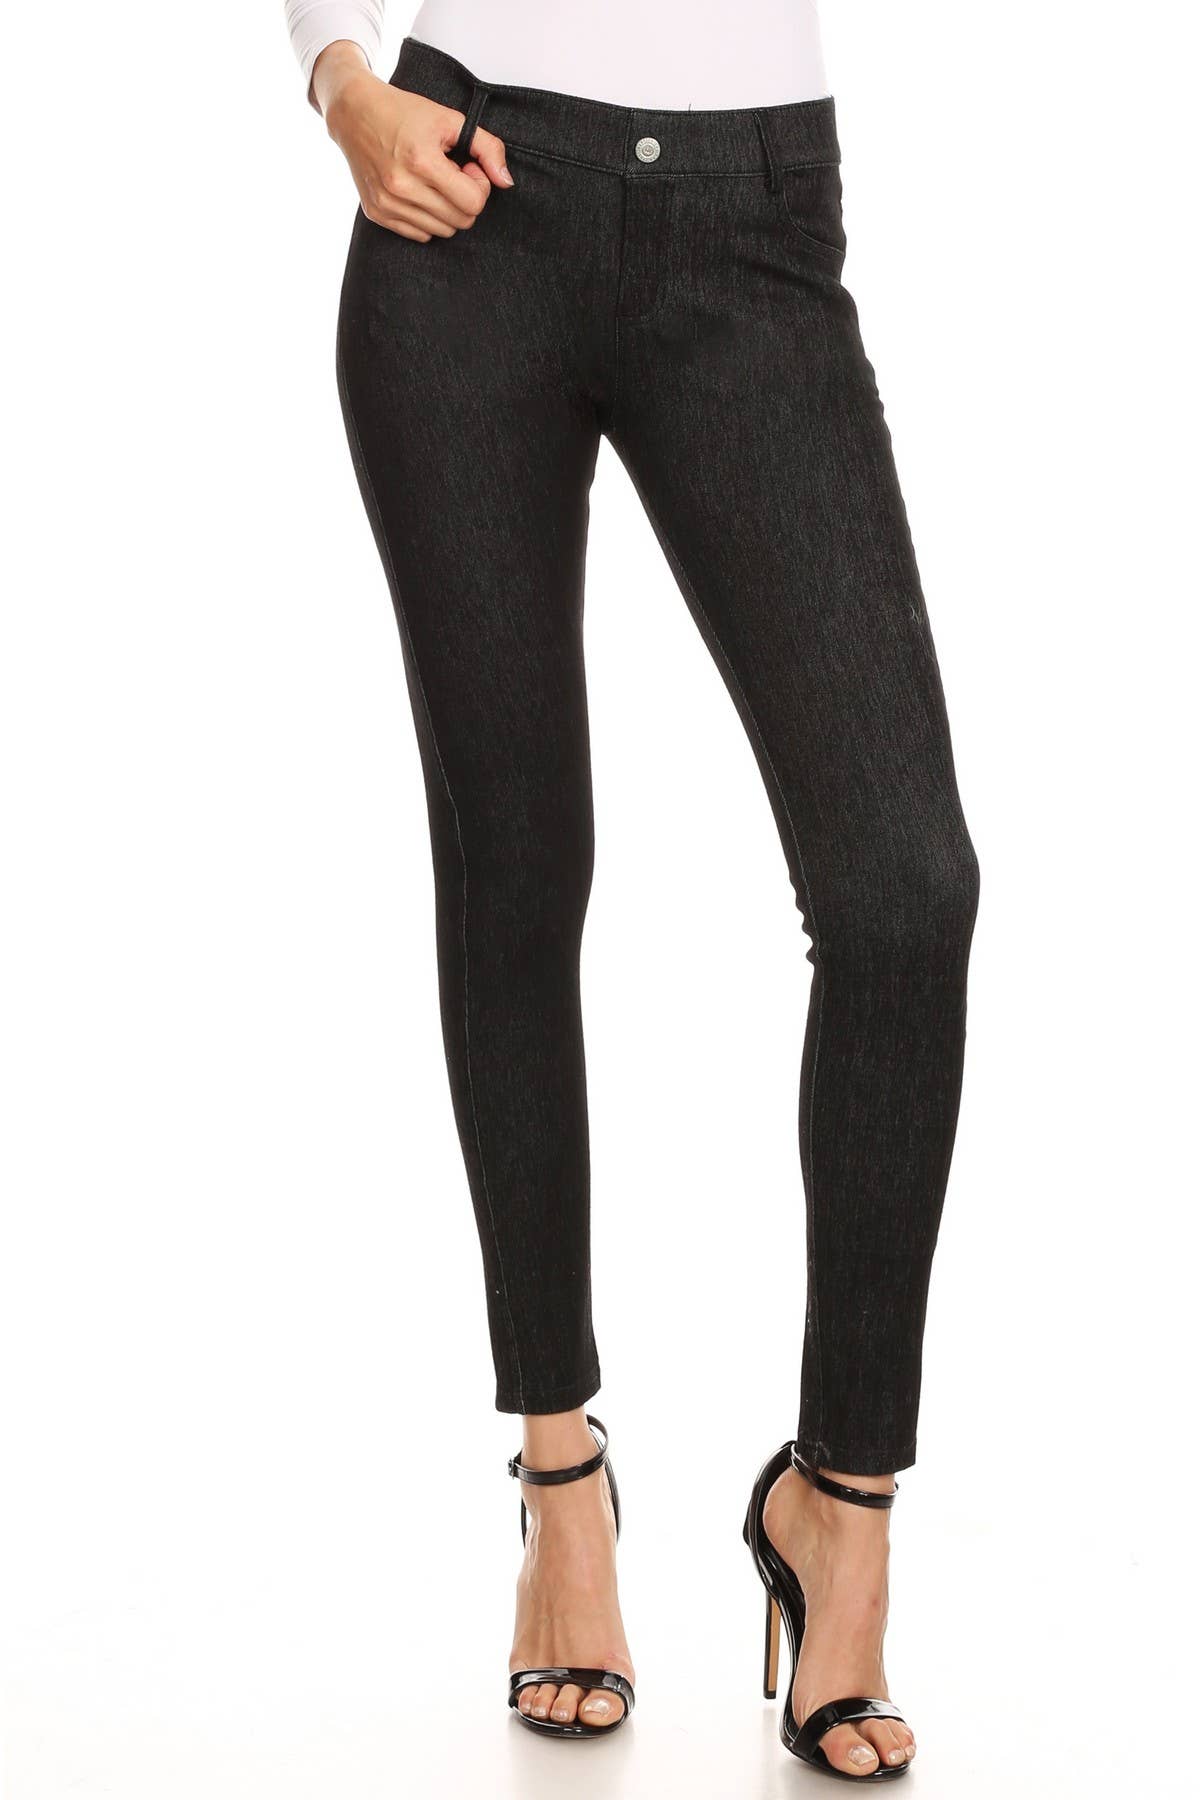 SIMPLY BE WOMENS STRETCHY SKINNY BLACK DENIM JEGGINGS JEANS Sizes 12-30 L R  S